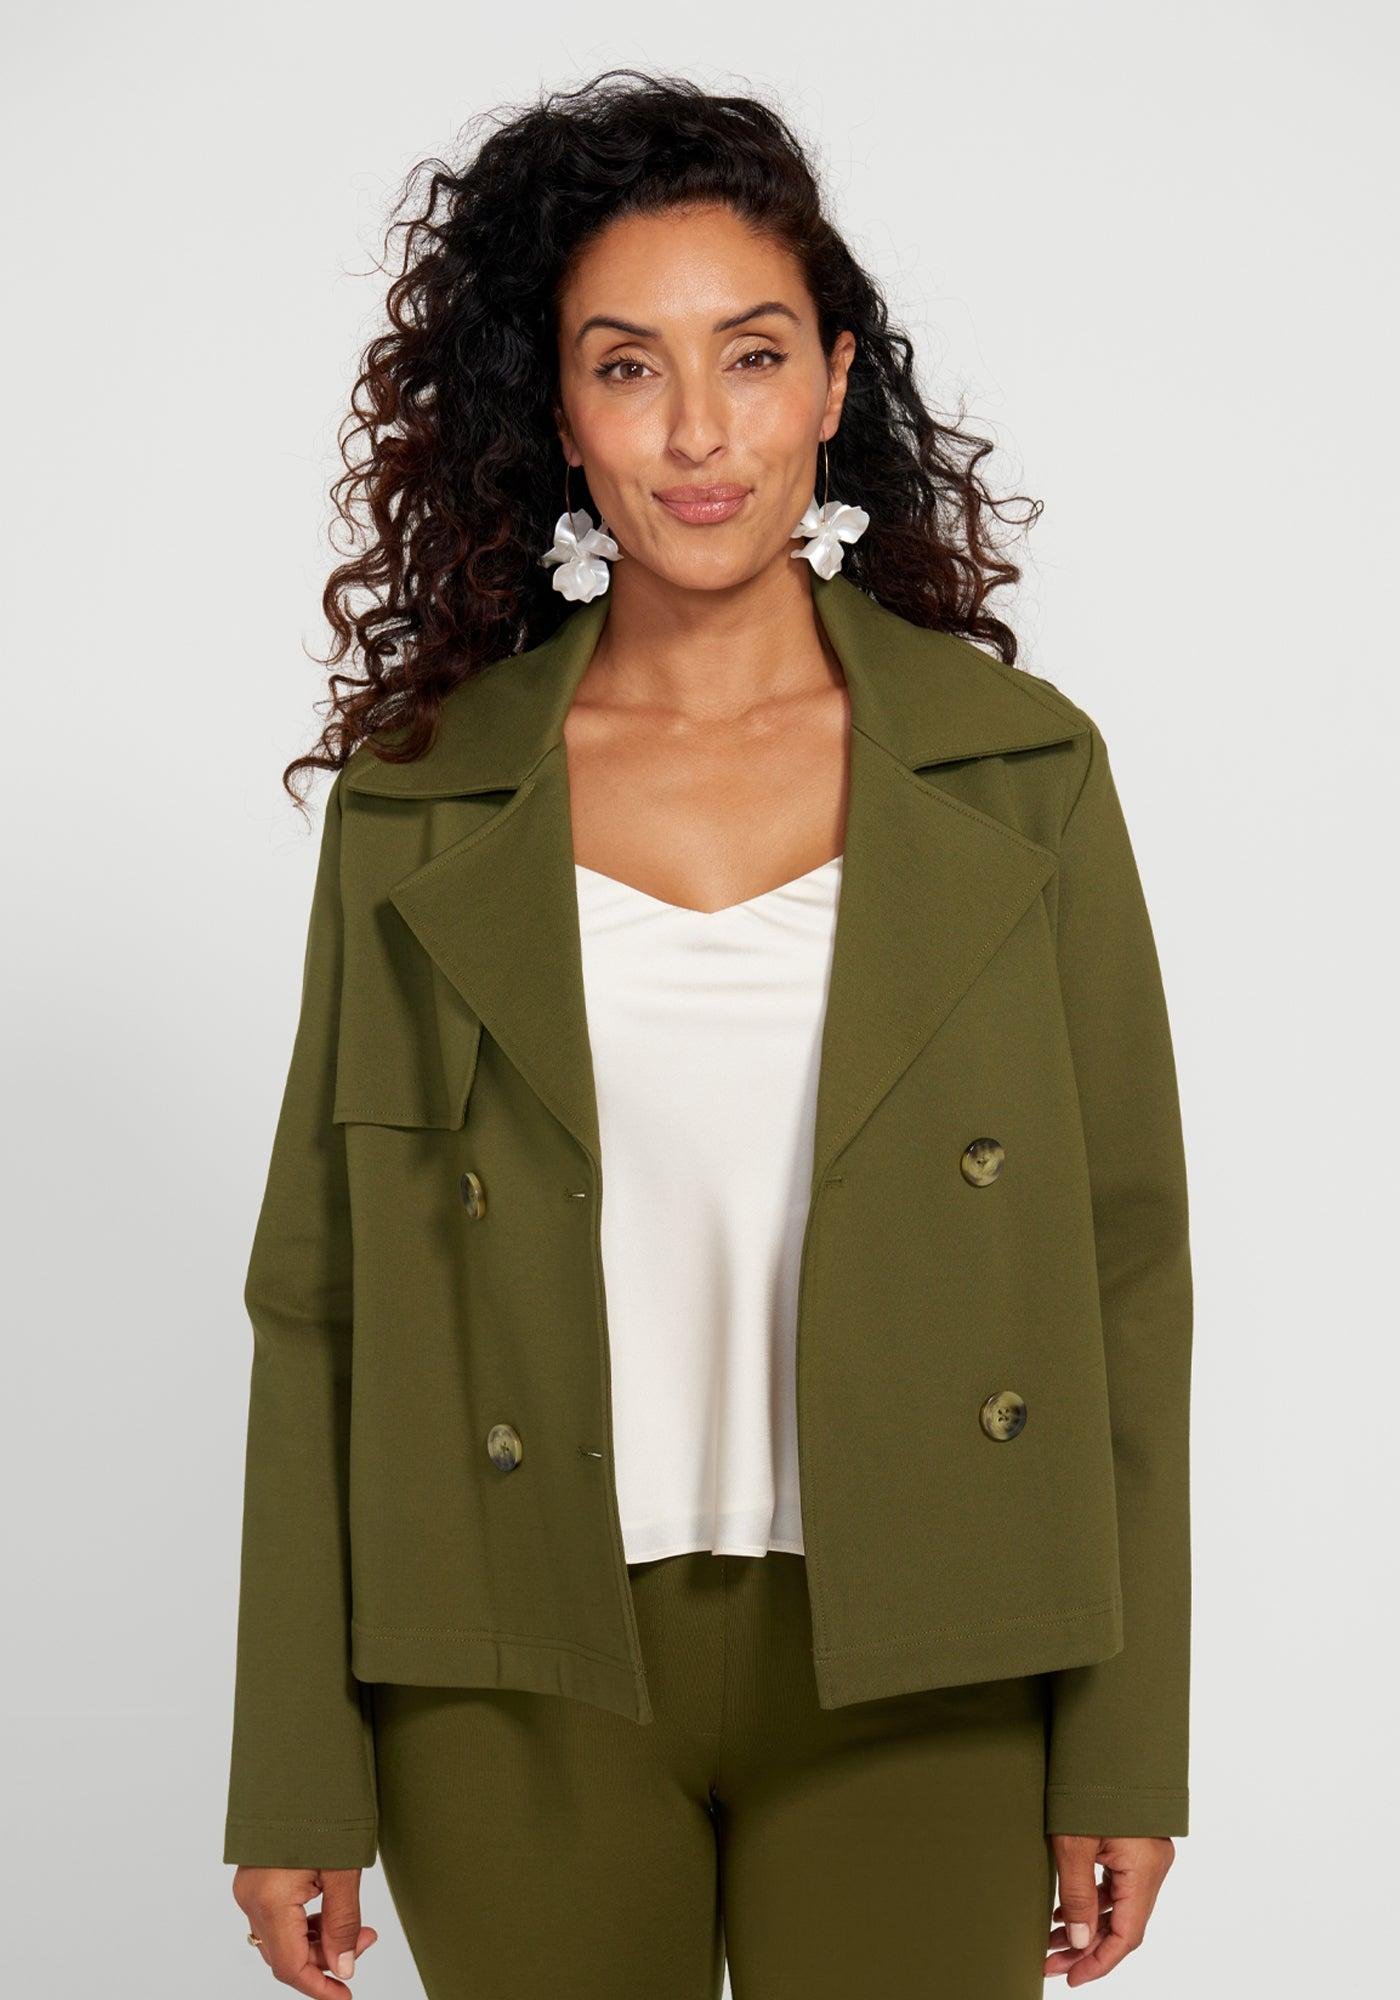 Betabrand Women's Cropped Peacoat by BETABRAND